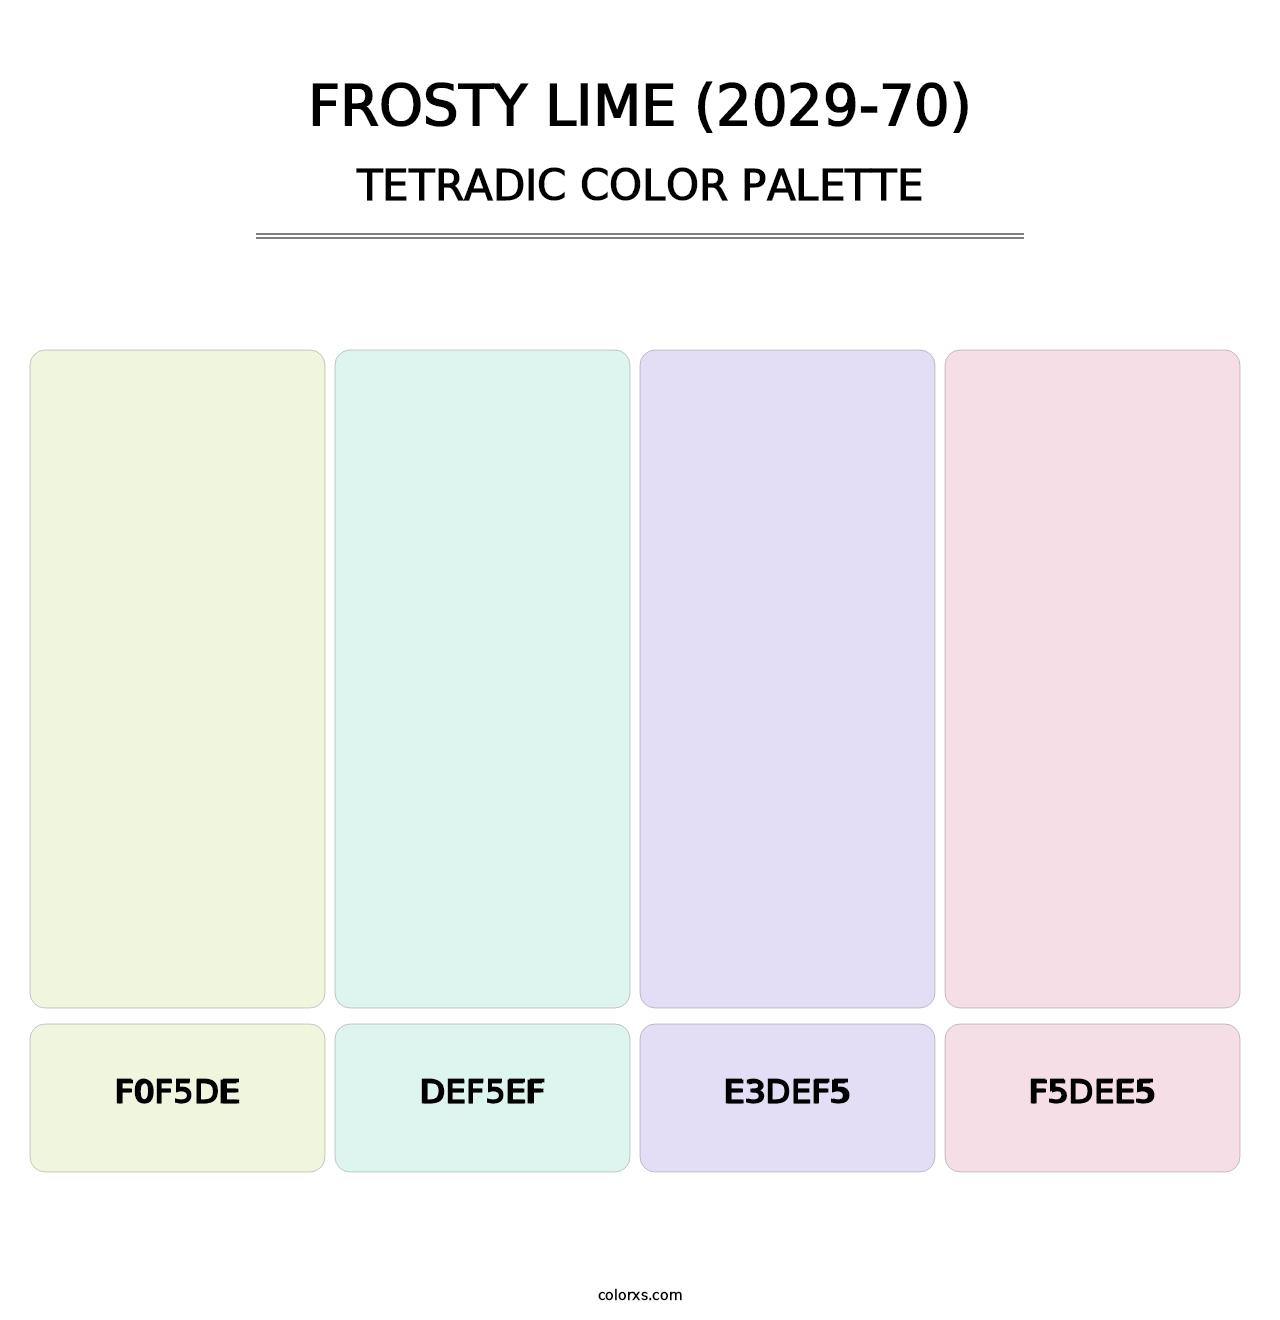 Frosty Lime (2029-70) - Tetradic Color Palette